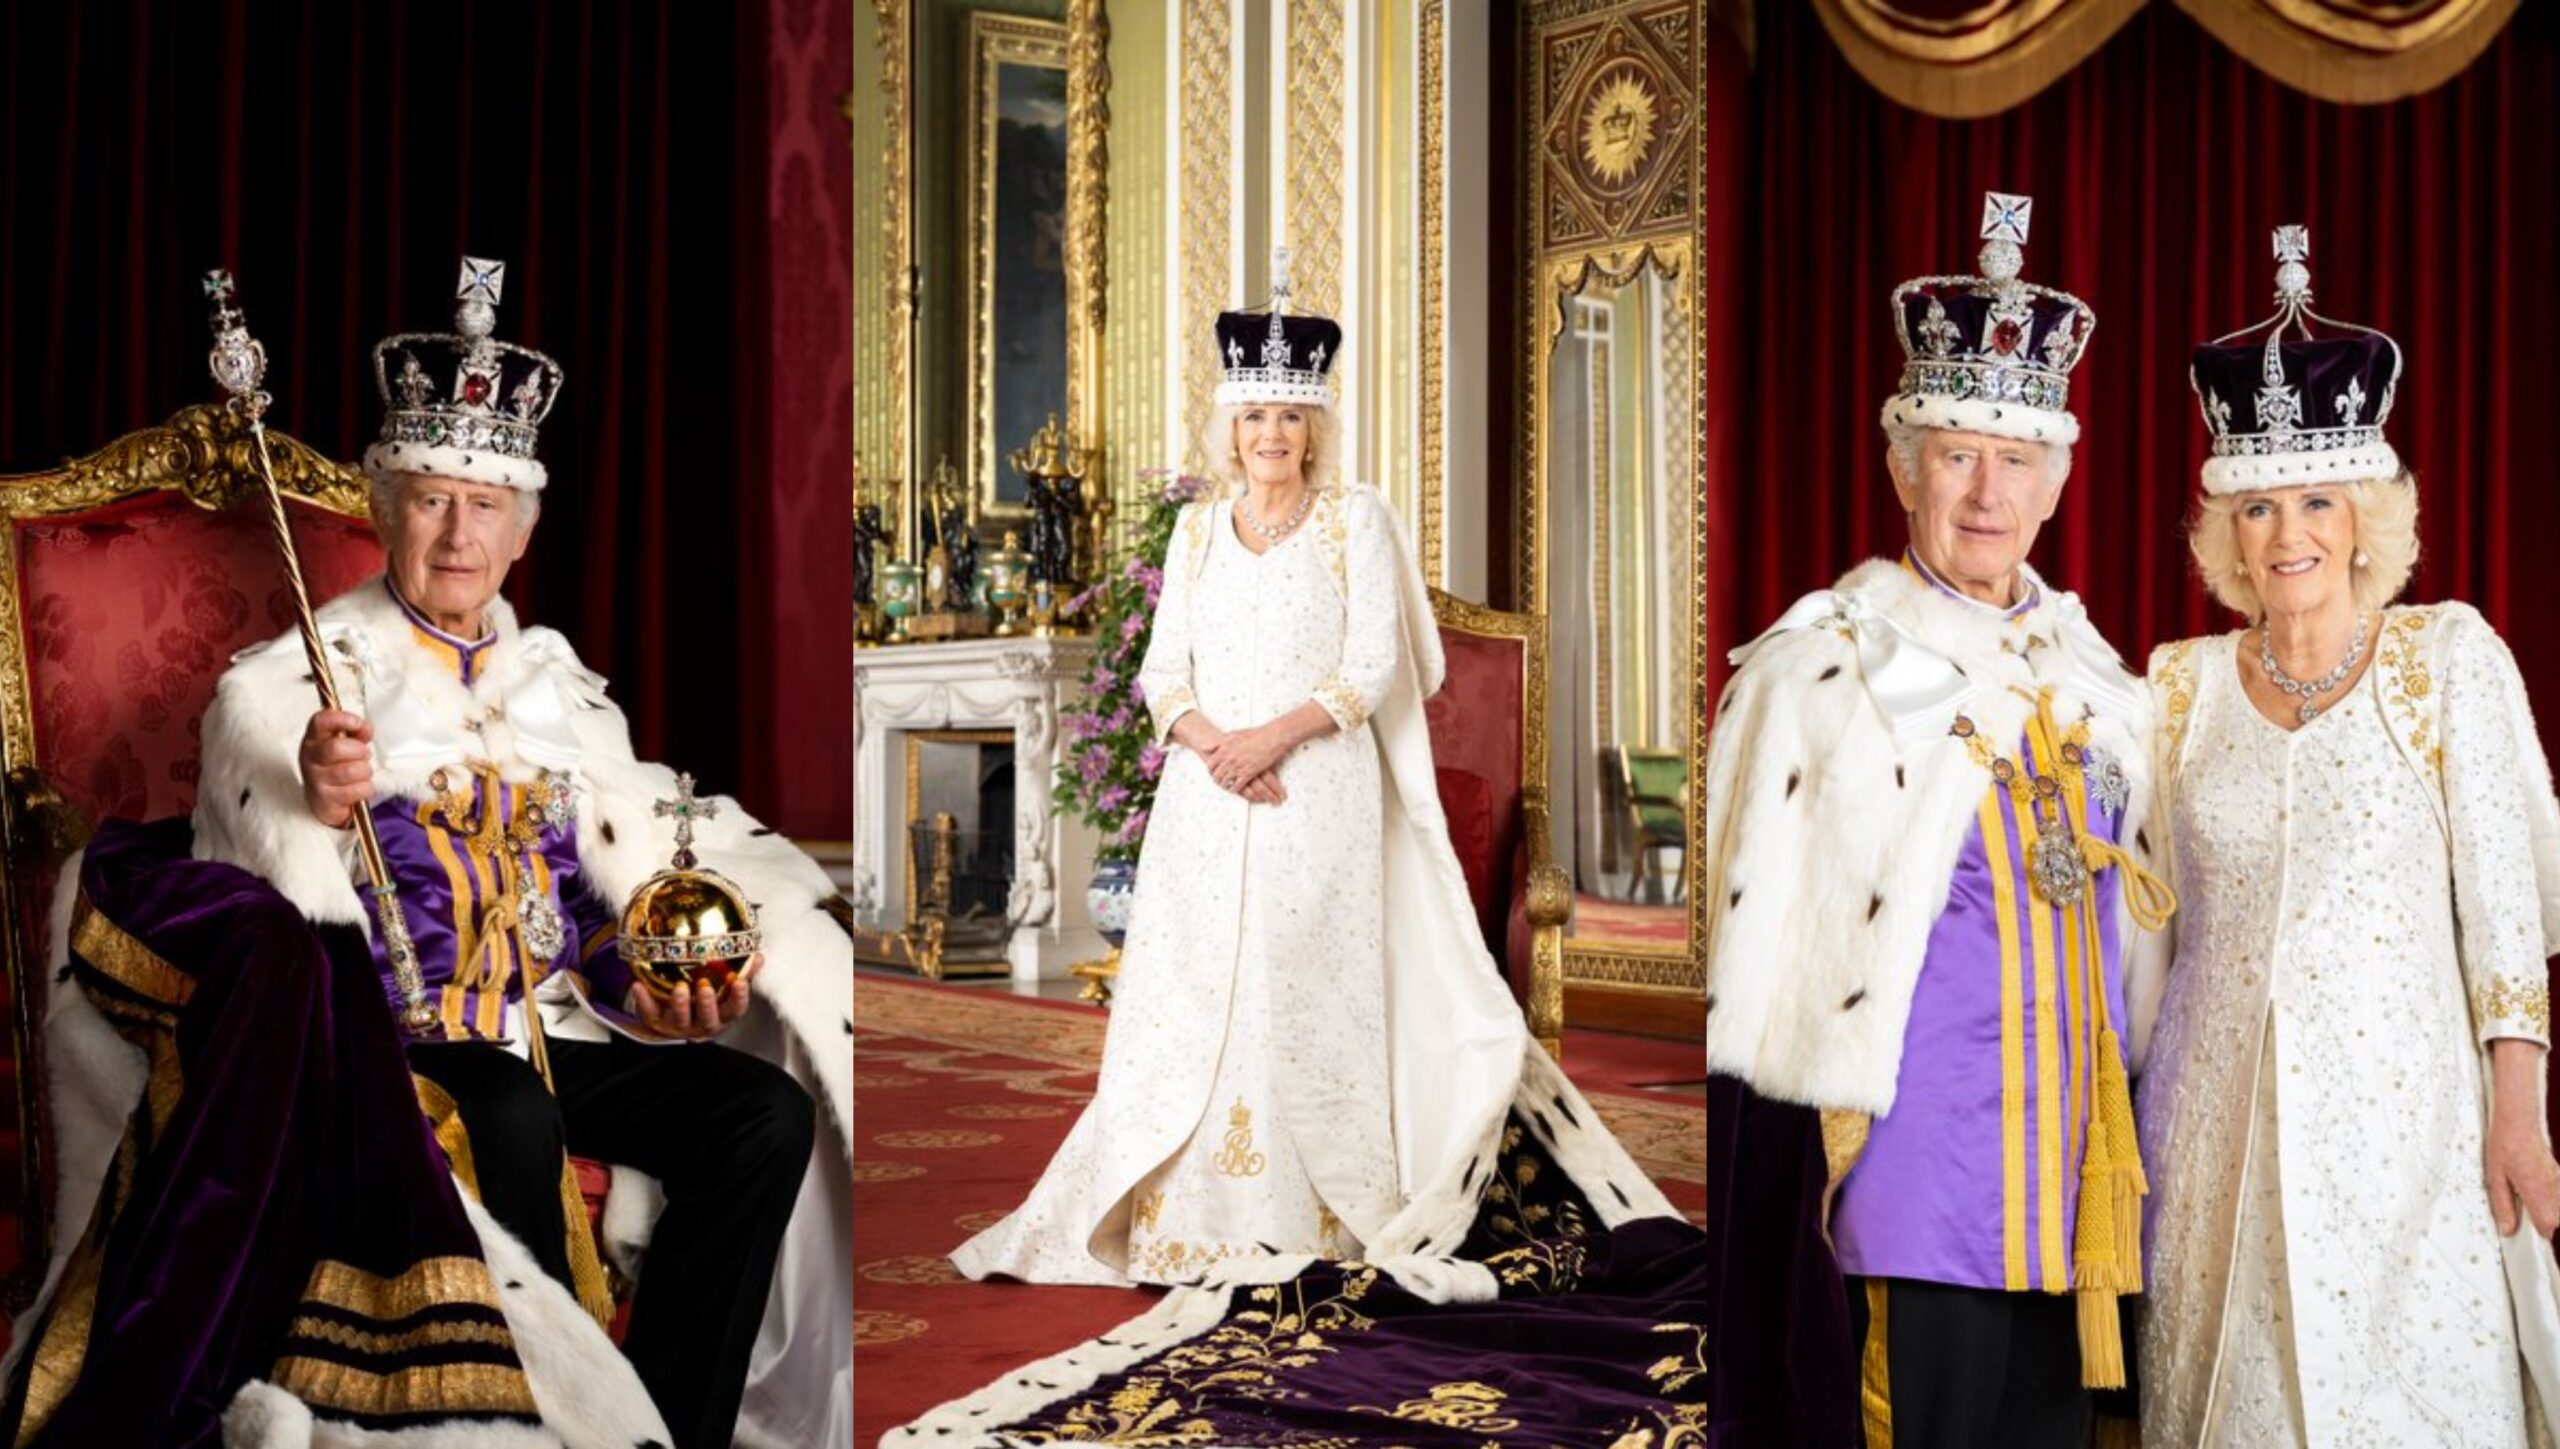 The Buckingham Palace releases Official photos of King Charles III and Queen Camilla